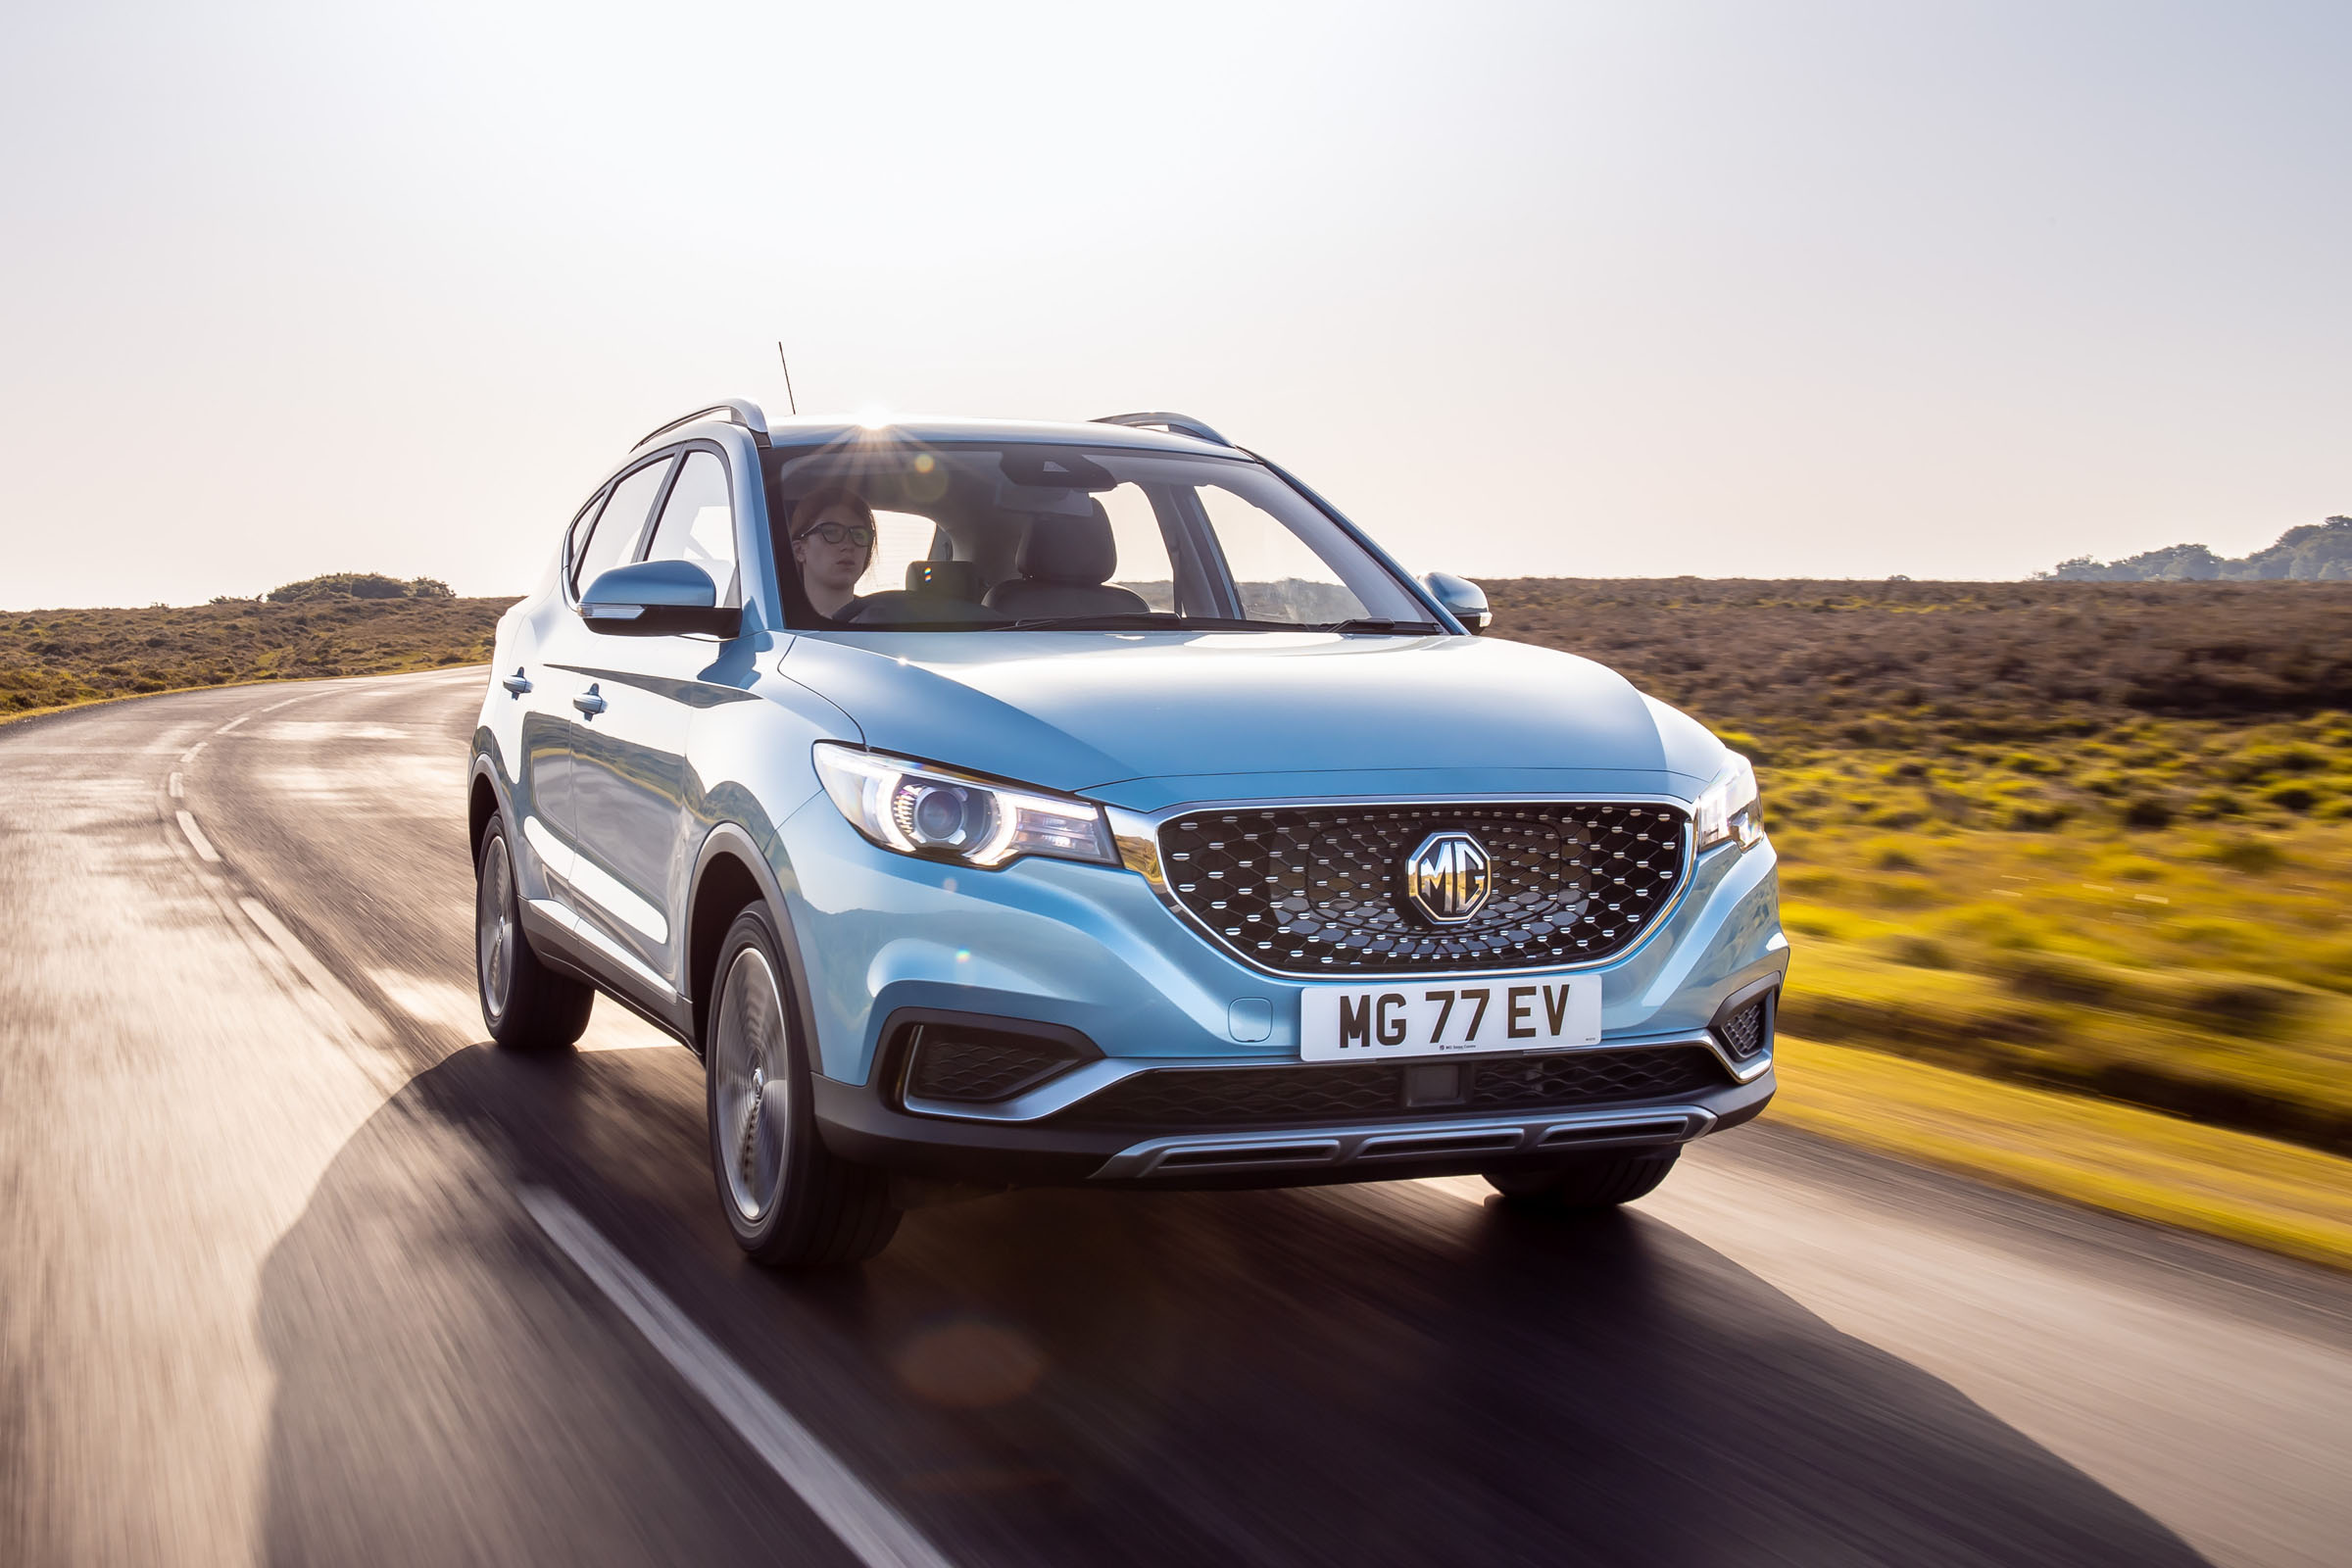 MG ZS EV SUV review - pictures | Carbuyer